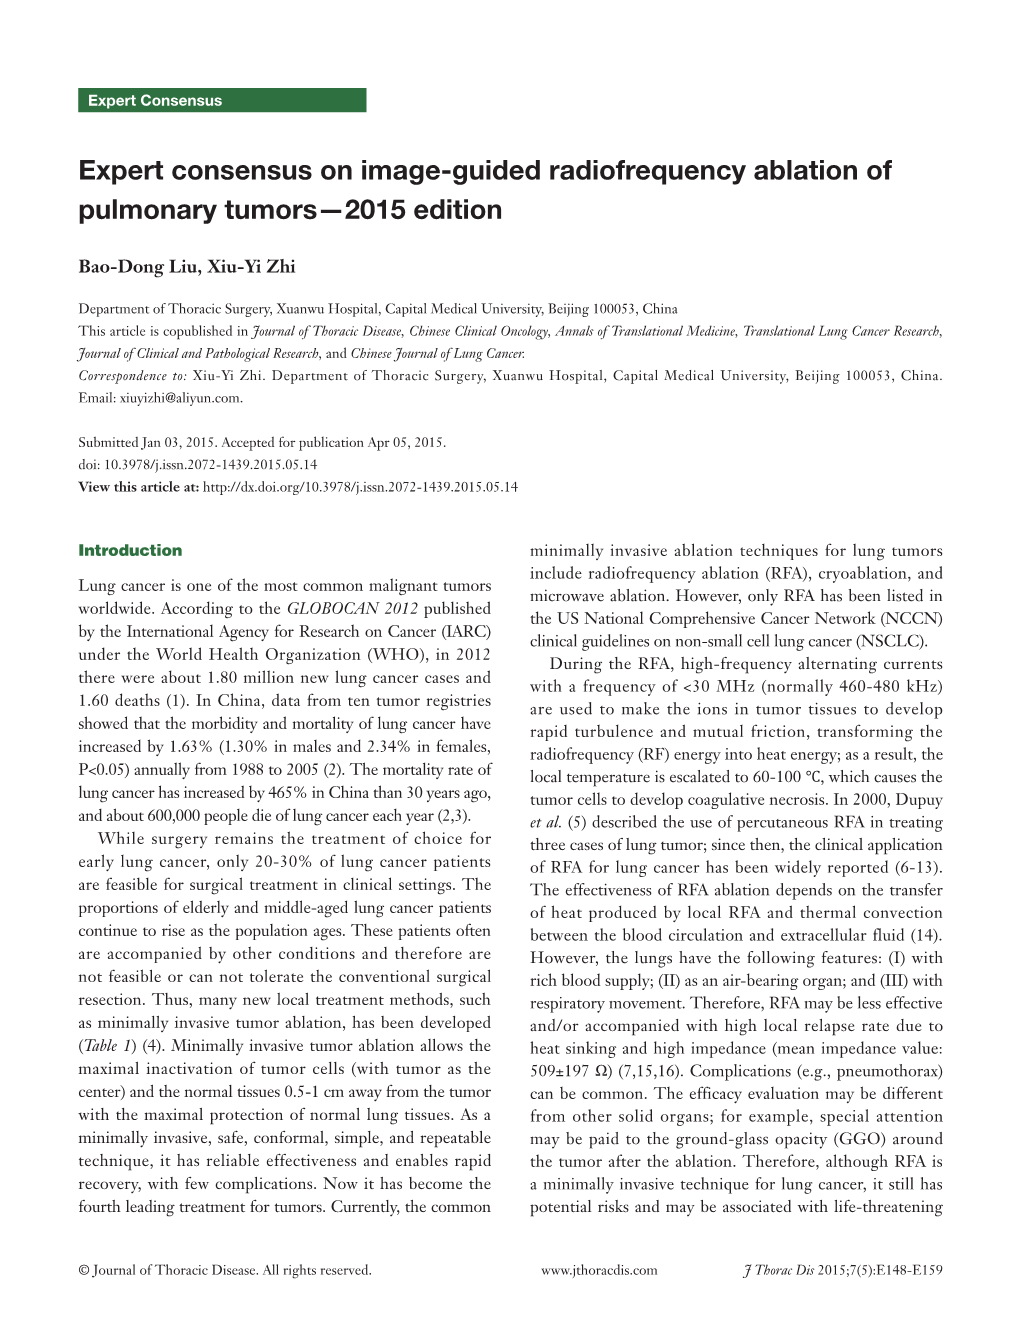 Expert Consensus on Image-Guided Radiofrequency Ablation of Pulmonary Tumors—2015 Edition